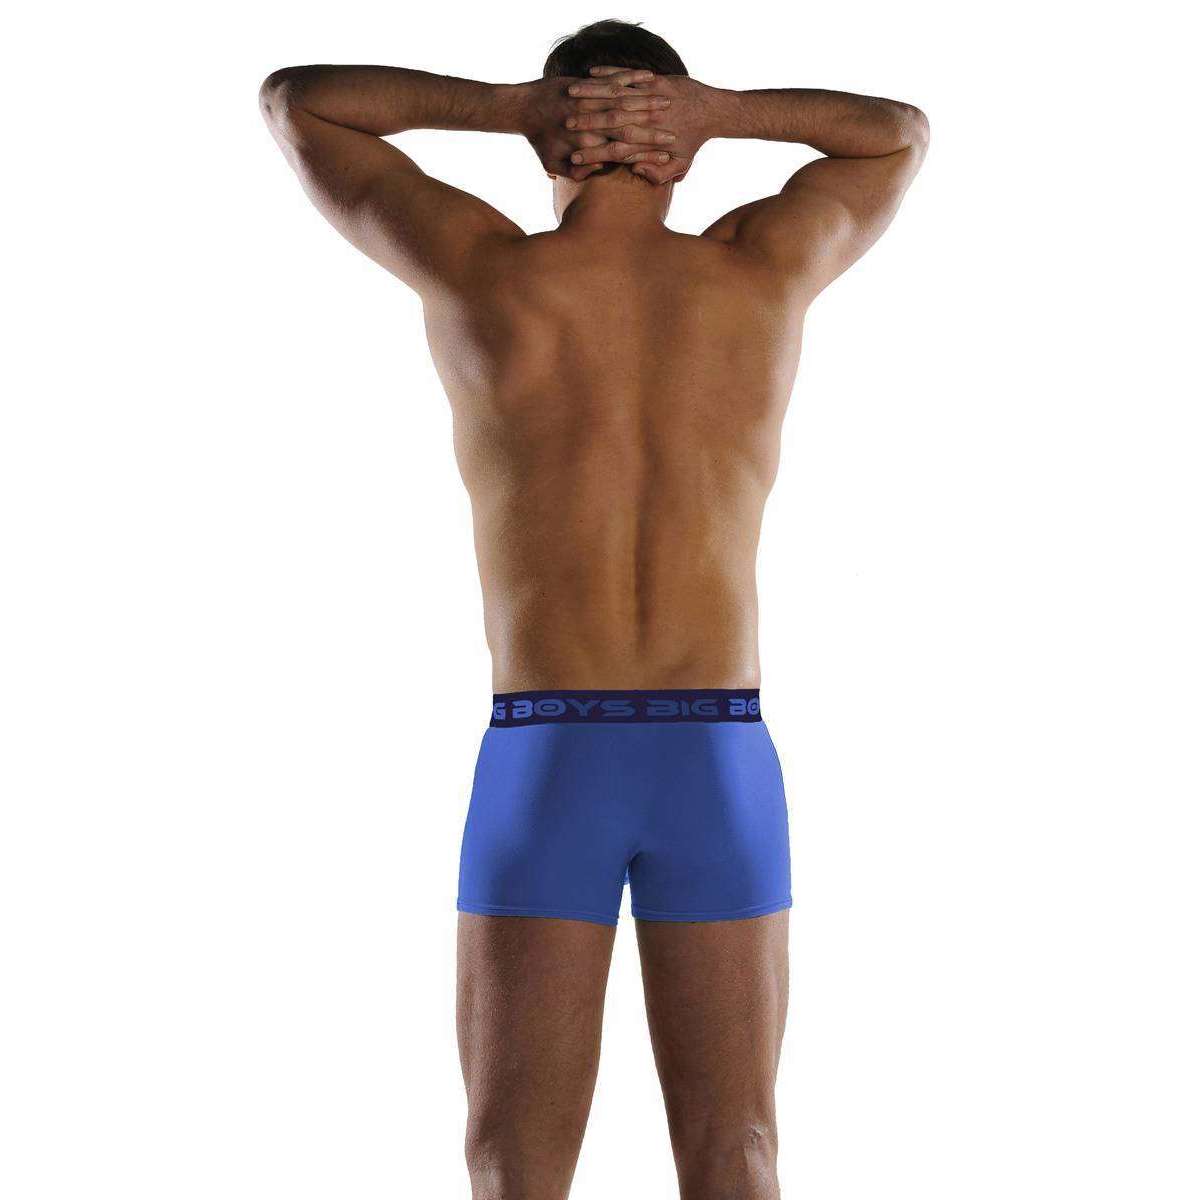 More than 25,000 shoppers love these super breathable boxer briefs